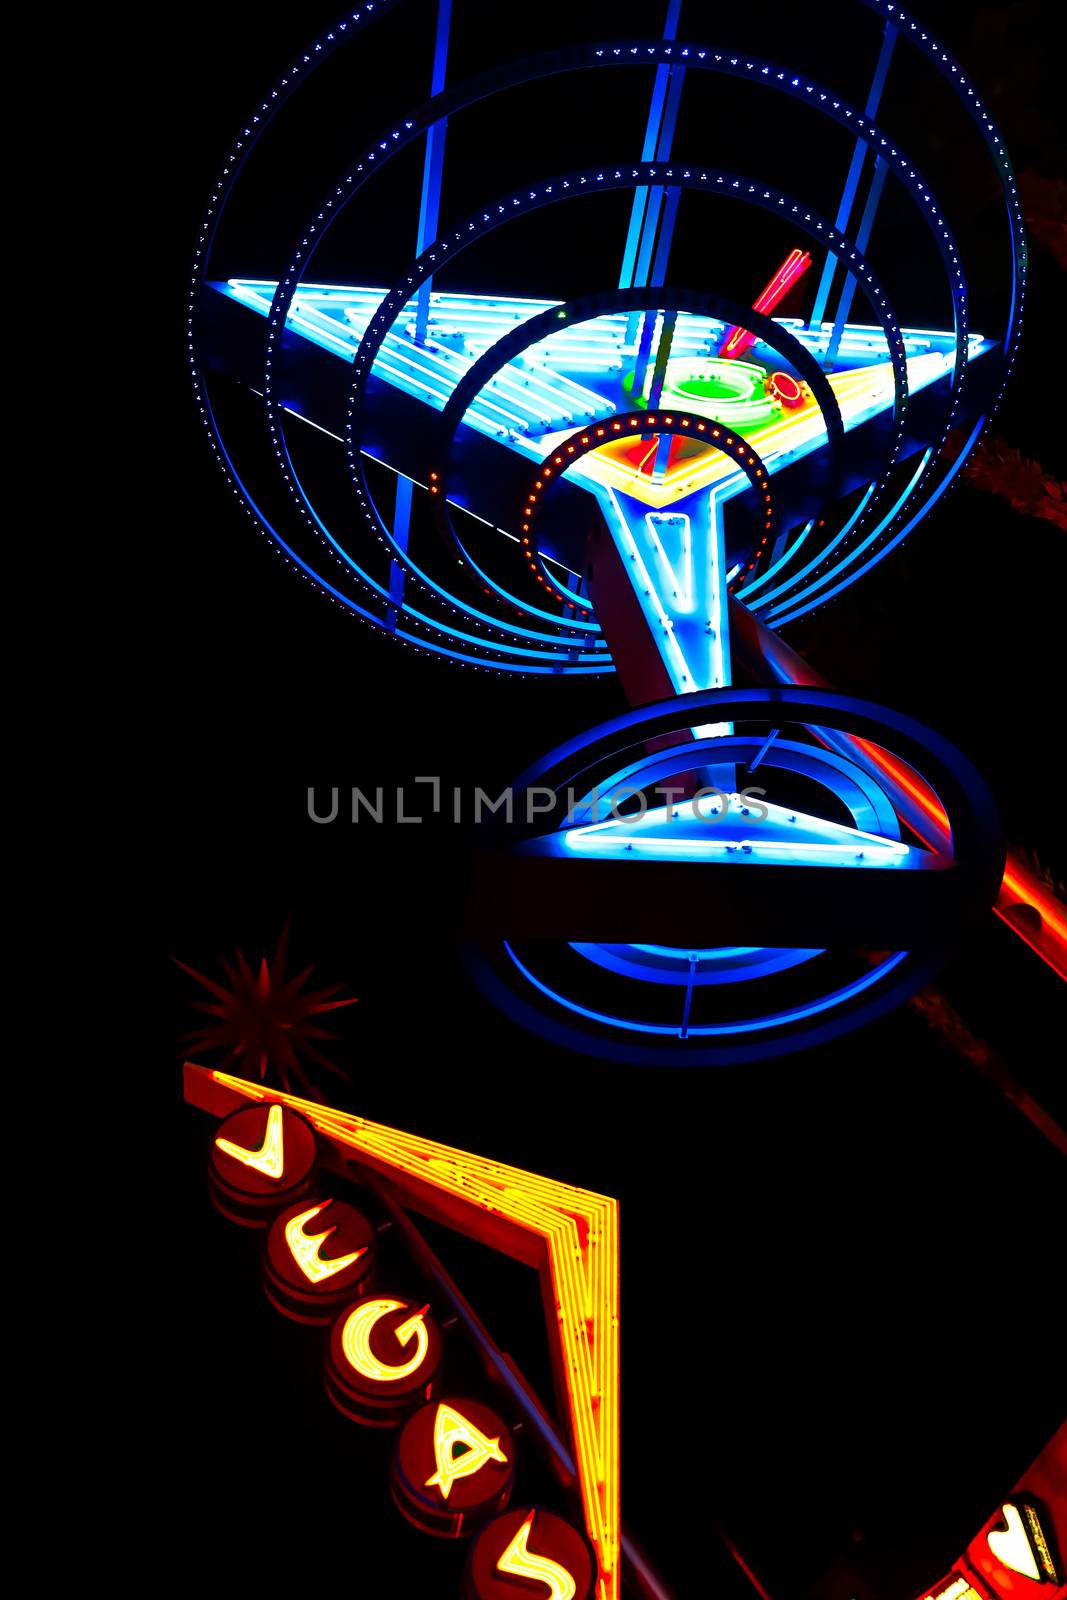 Las Vegas,NV/USA - Oct 09,2016 : "Oscar's Neon Martini Glass"  and Vegas giant neon sign on display above the street near Fremont Street Experience in Las Vegas.The Fremont Street Experience is a pedestrian mall and attraction in downtown Las Vegas.